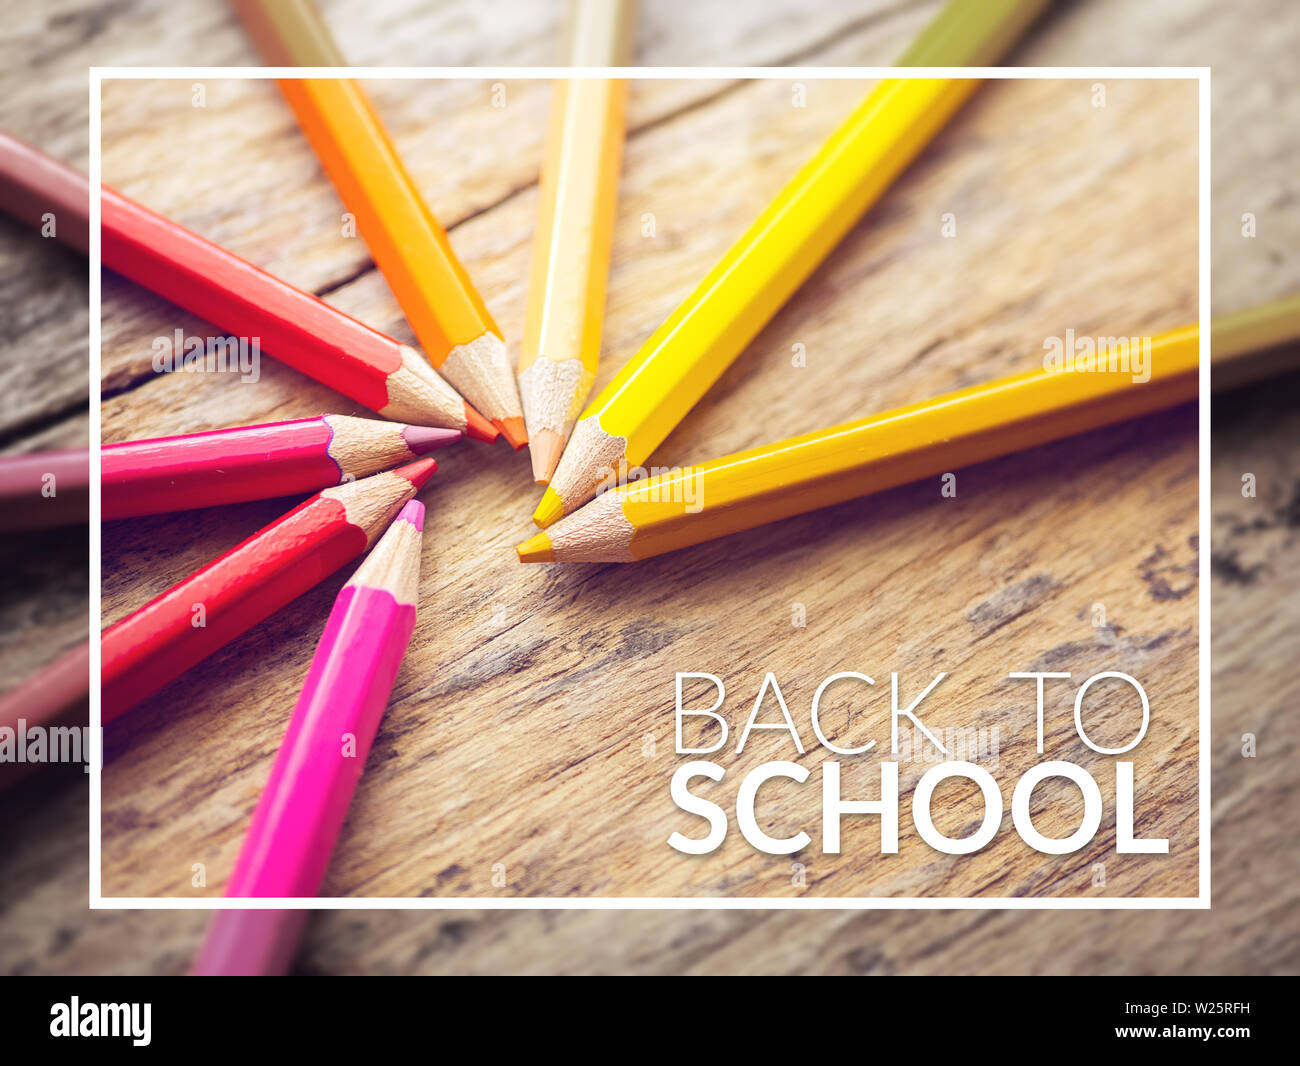 colorful color pencils on old wooden table with text back to school Stock Photo